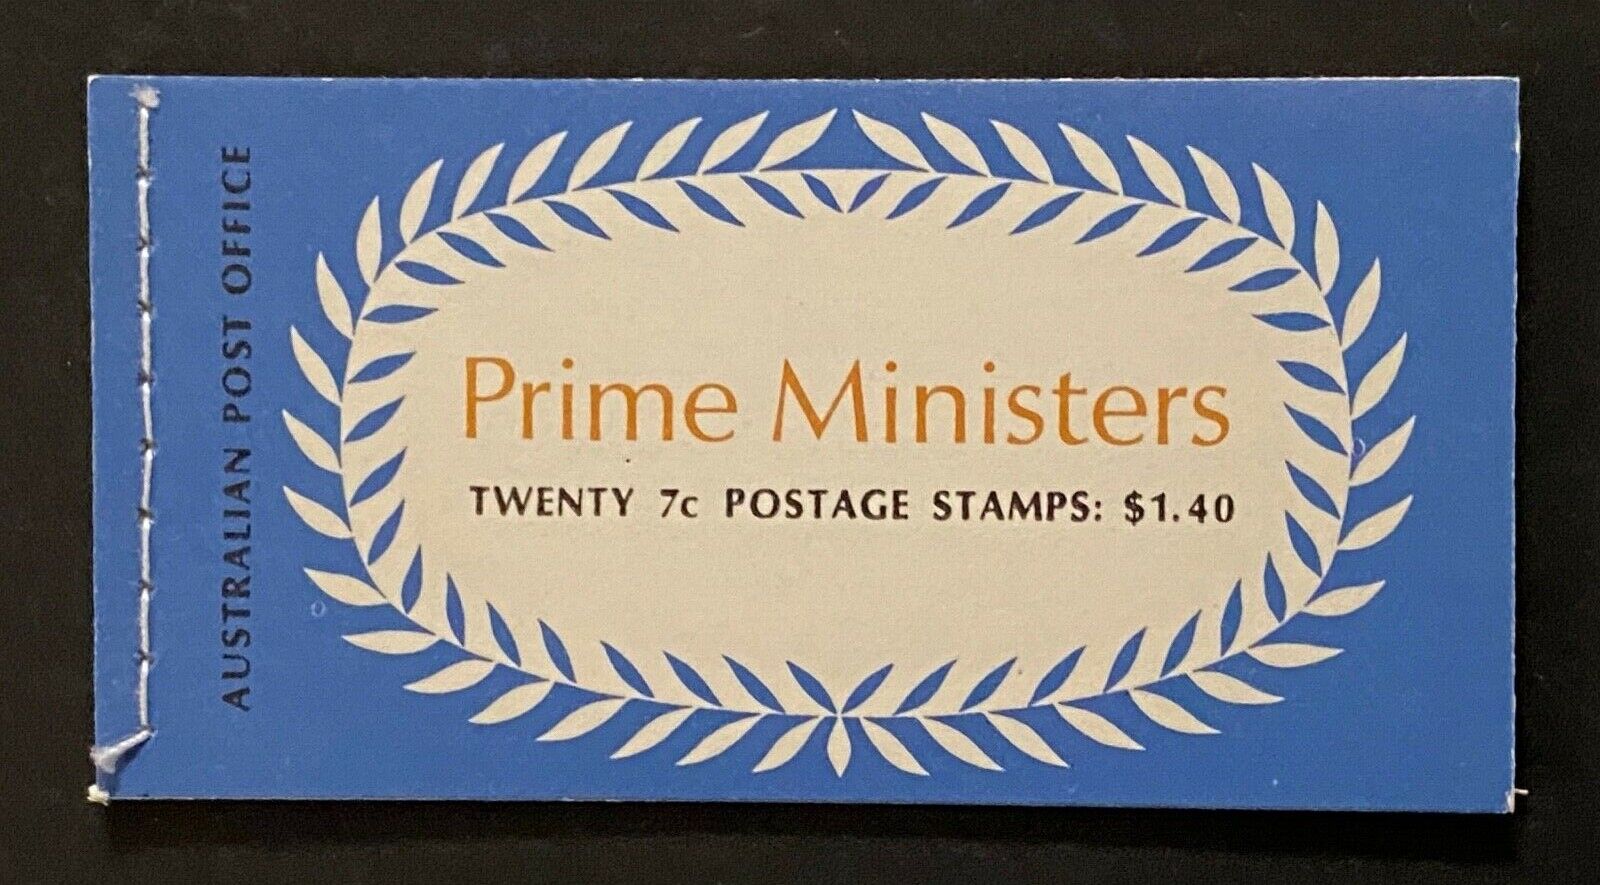 Stamptlc Australia 514a 517a Prime Ministers 7c Pane Entire Booklet March 8 1972